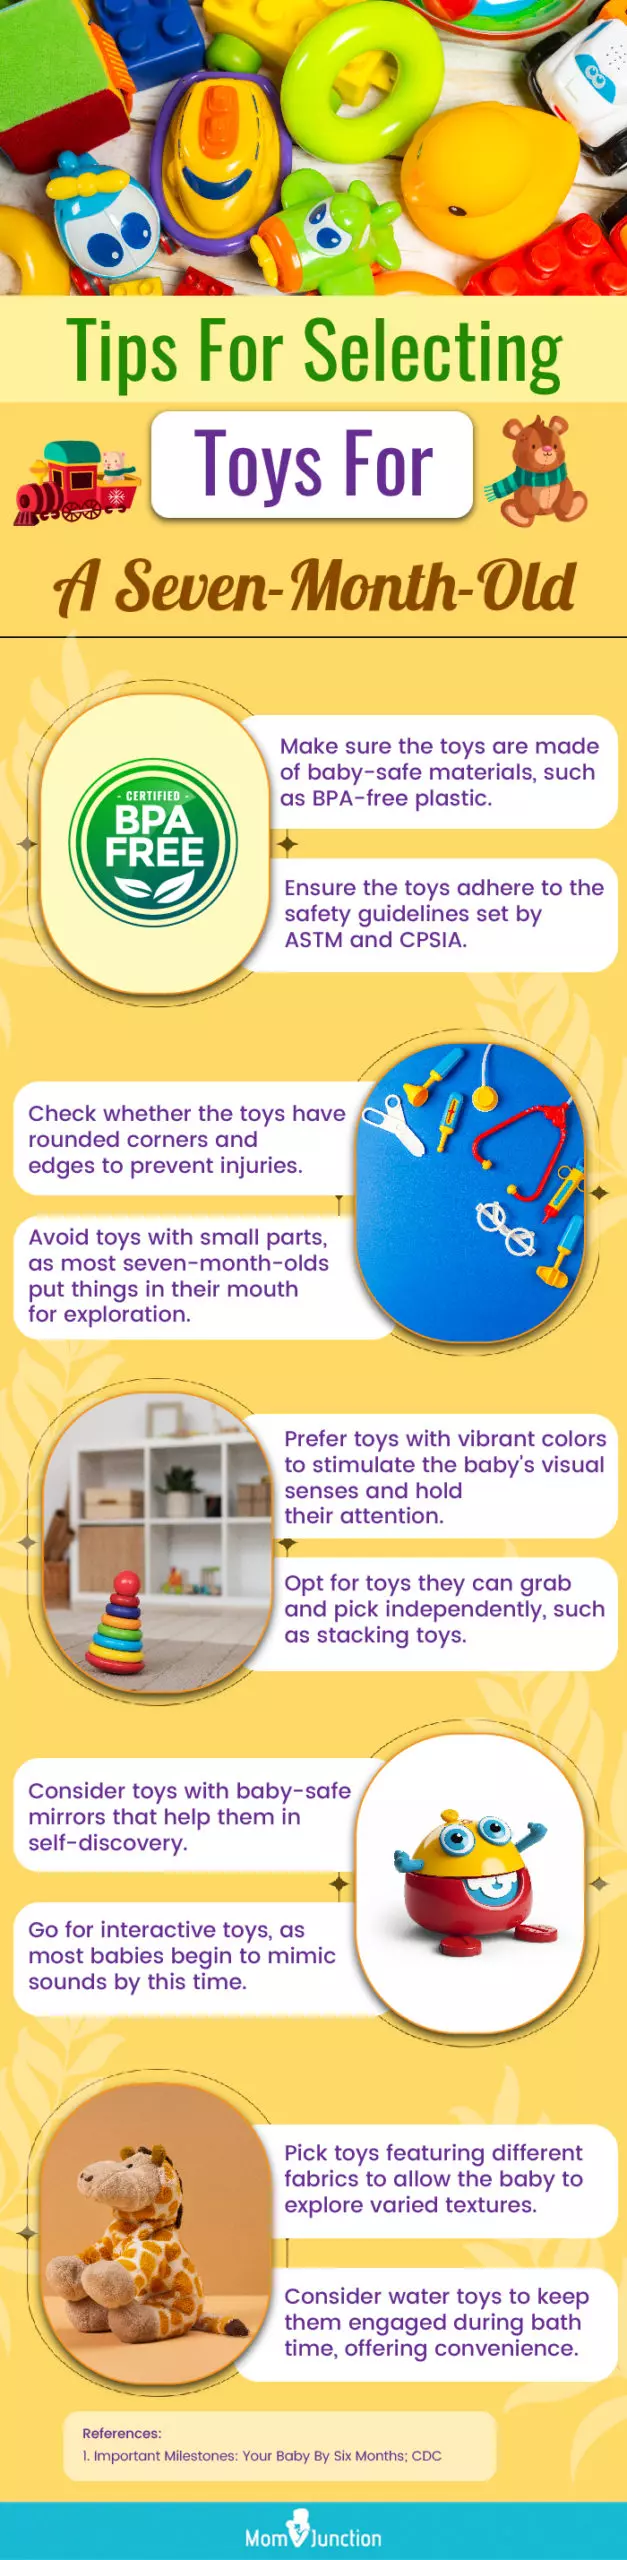 Tips For Selecting Toys For A Seven-Month-Old (infographic)